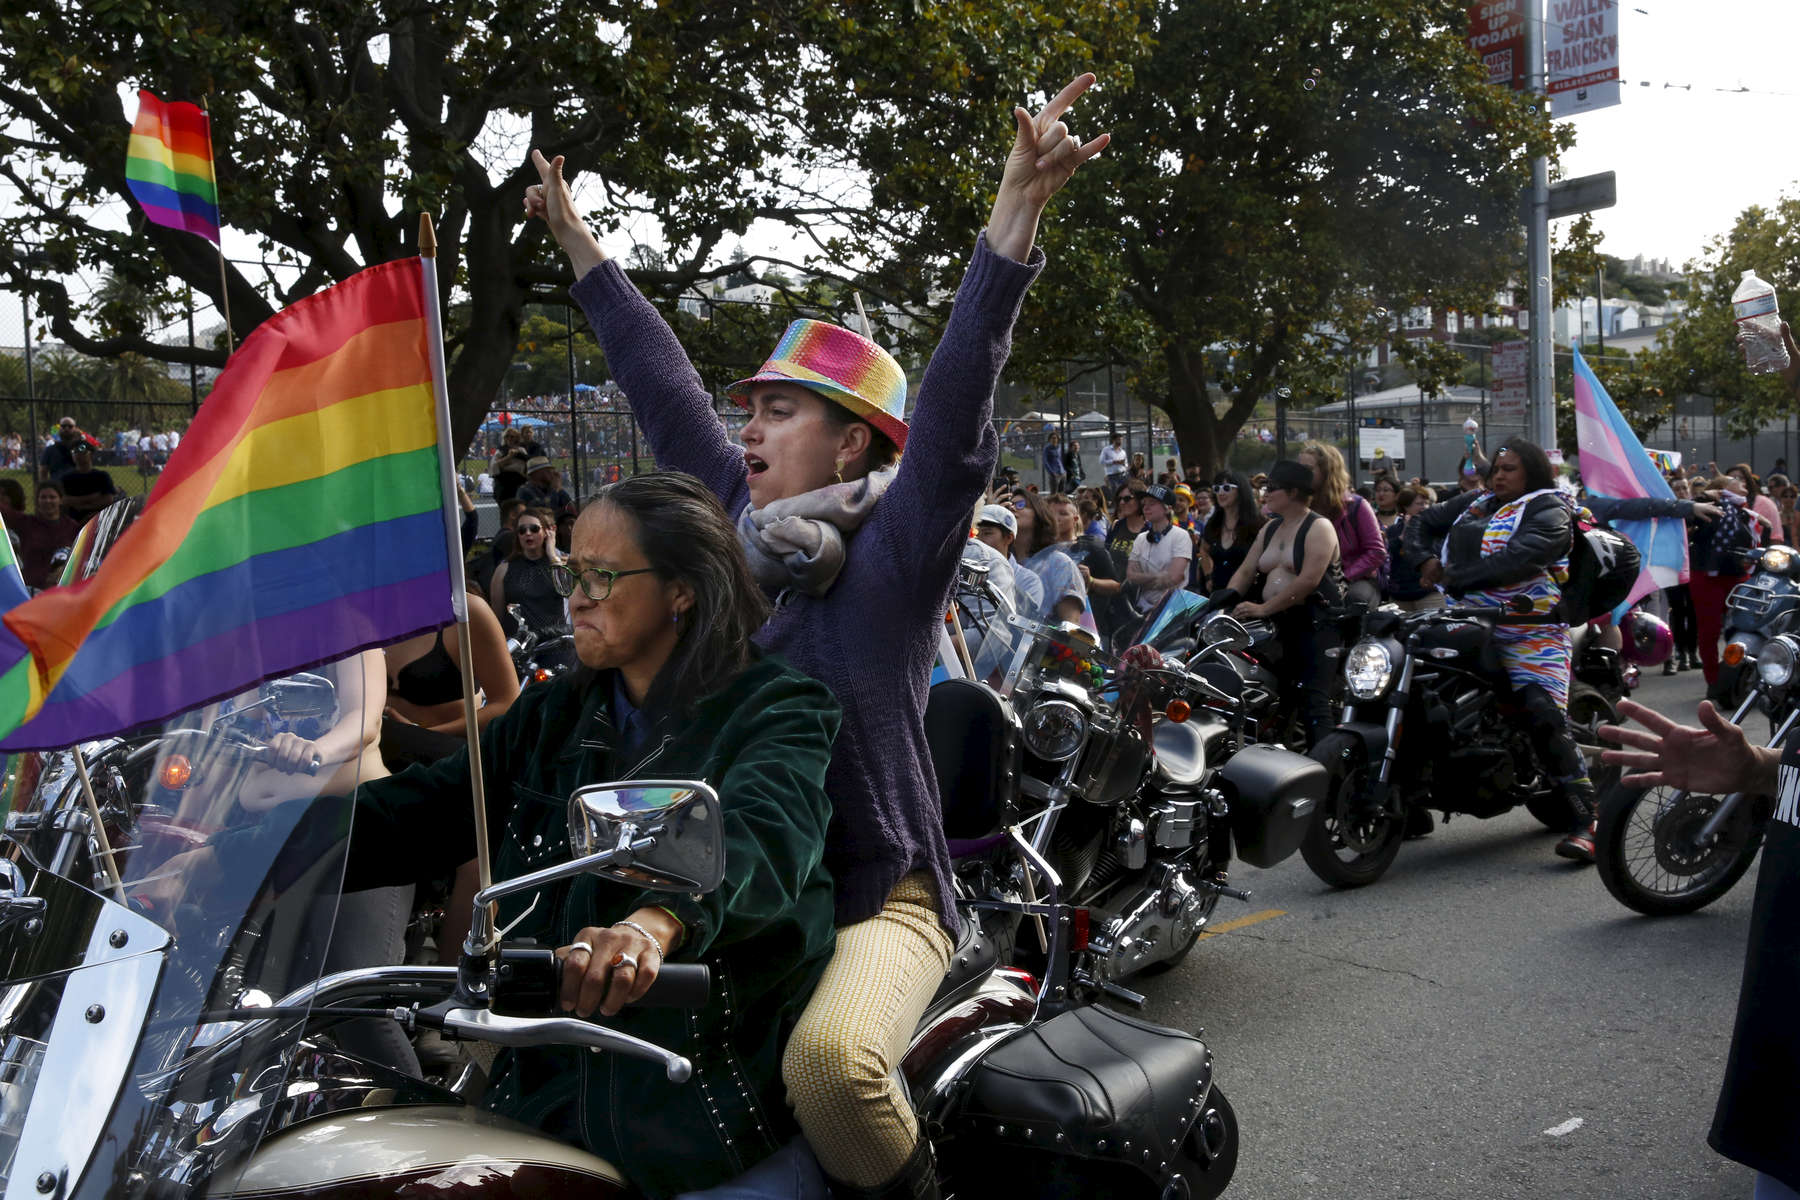 Chagua Camacho, left, revs her engine as Tracy Burt cheers right before they start the parade with the rest of the Dykes on Bikes during the annual Dyke March that started at Mission Dolores park and snaked around the neighborhood up through the Castro and back June 24, 2017 in San Francisco, Calif. 